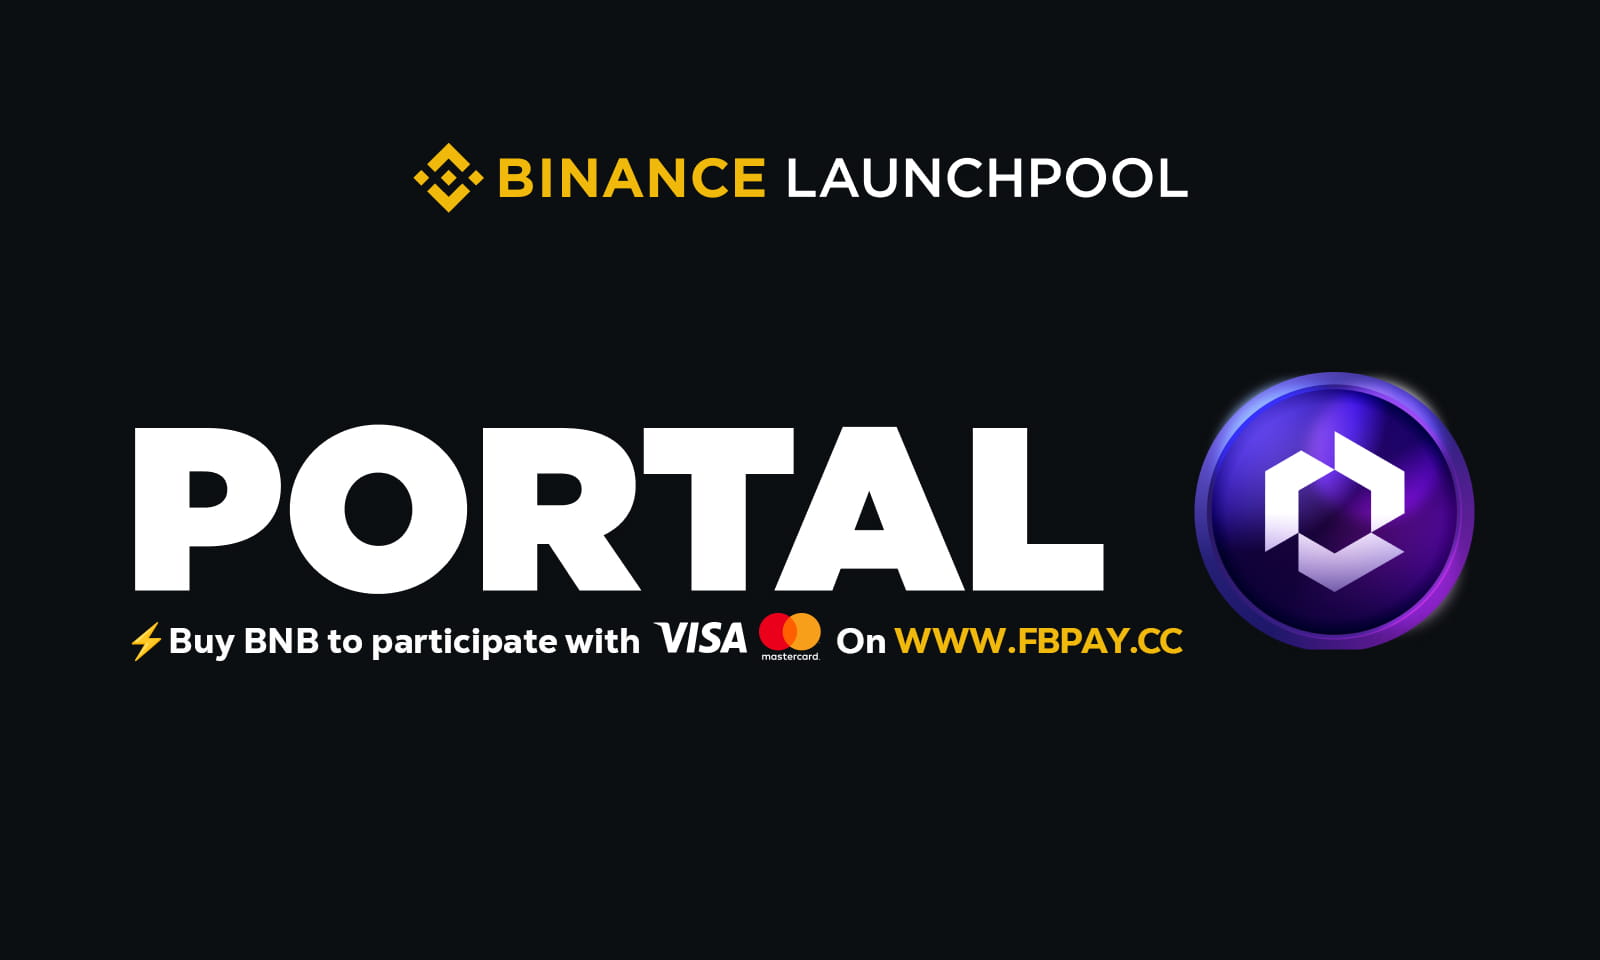 Buy BNB on FBPAY to participate in Binance’s 47th LaunchPool - Portal 